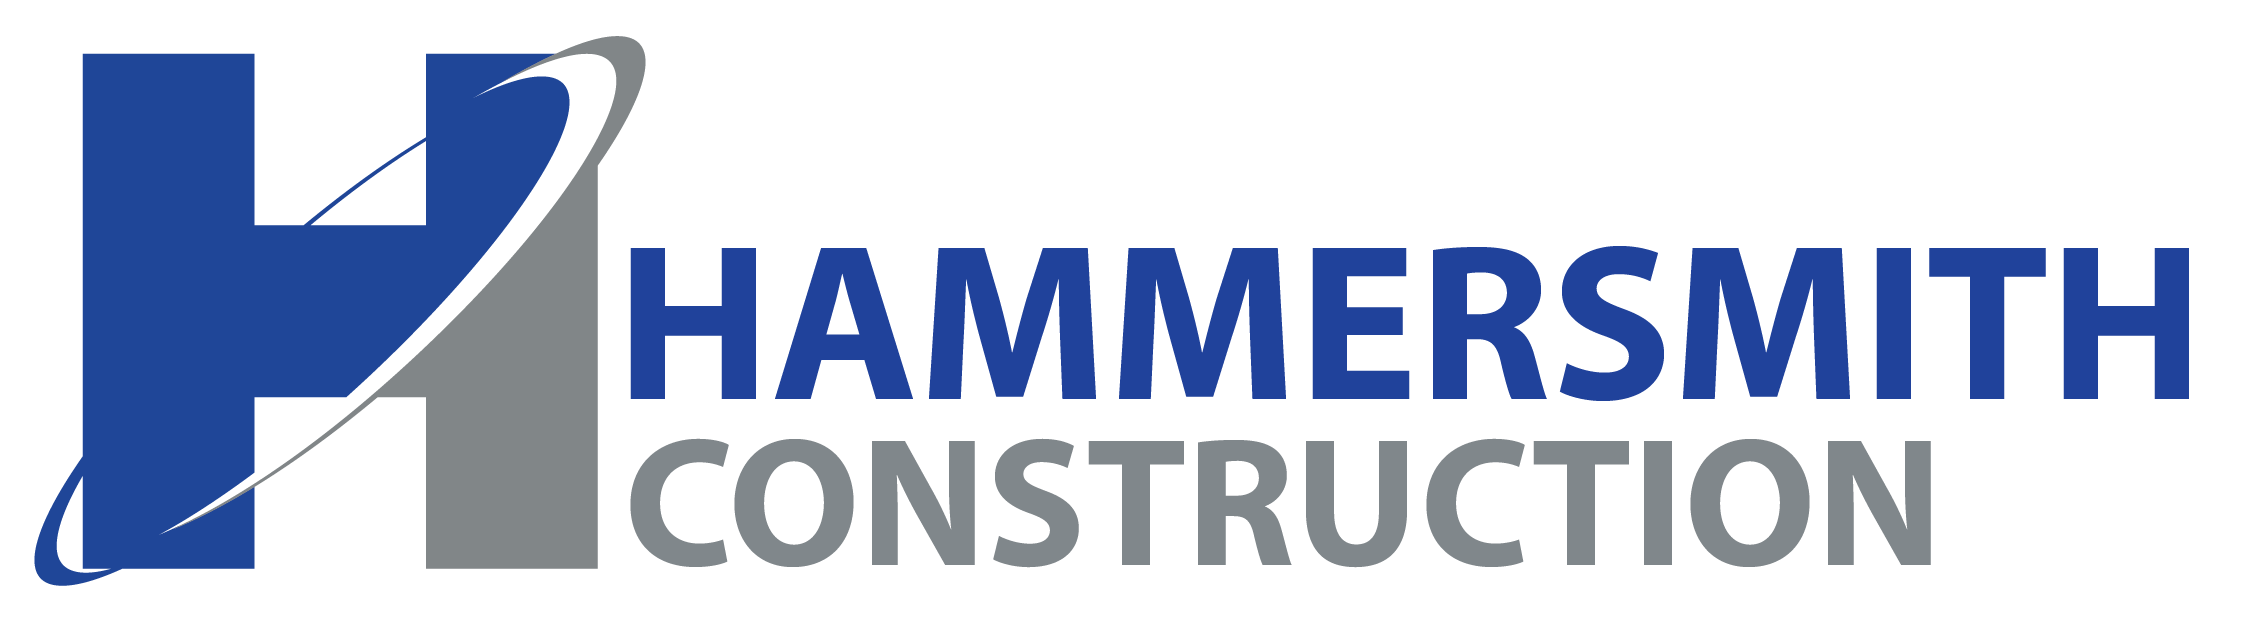 Hammersmith Construction – Restoring Buildings and Communities